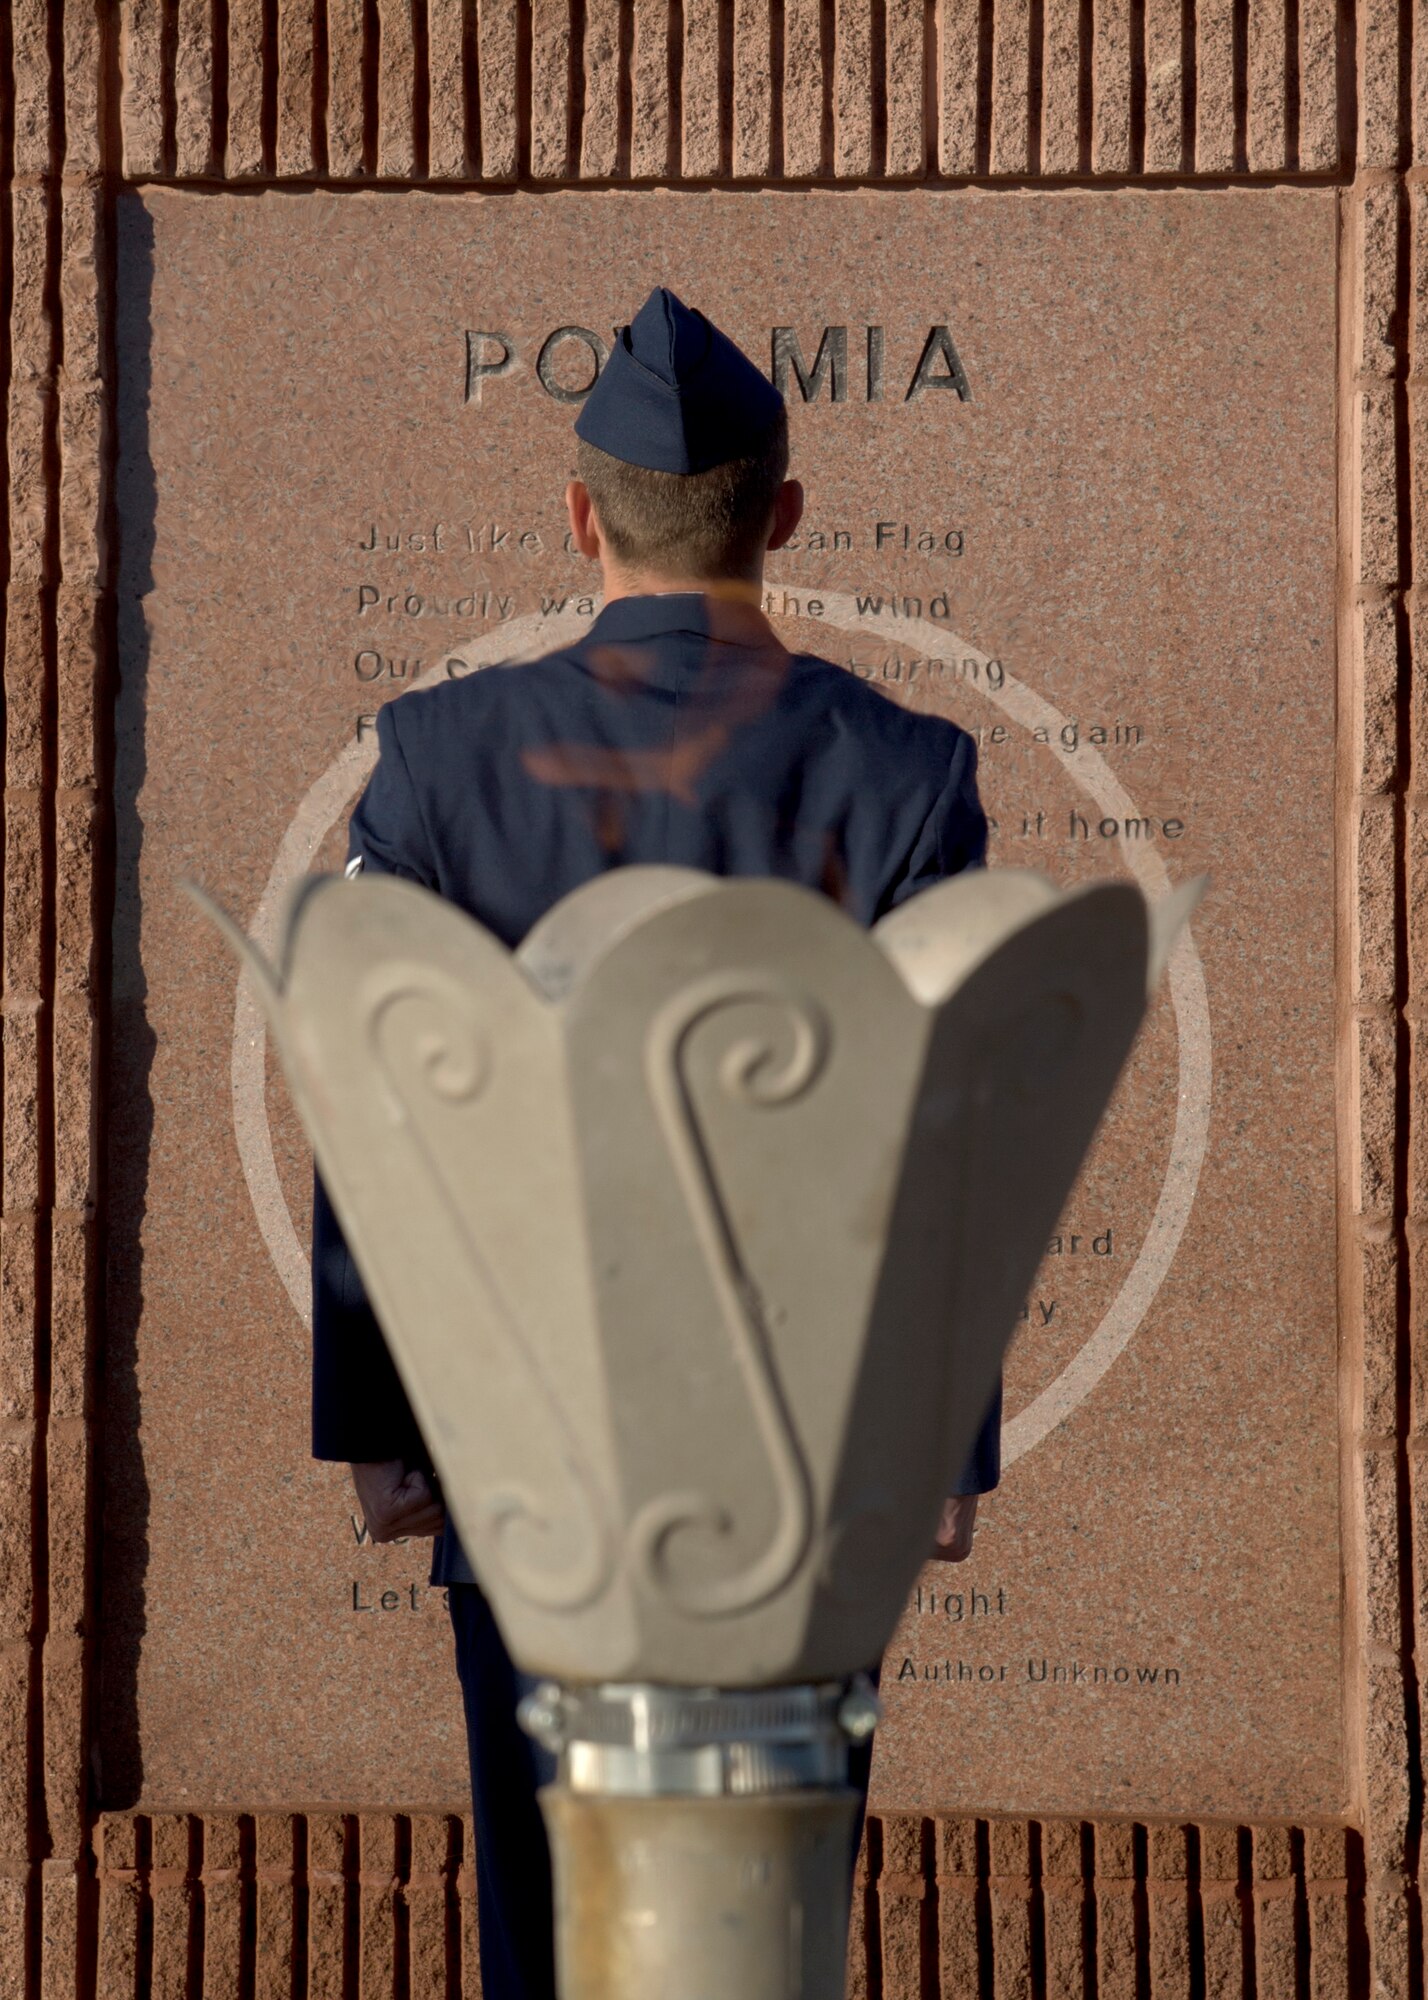 Staff Sgt. Christian Tone, an electrical systems craftsman for the 635th Material Maintenance Squadron, stands at attention in front of the POW/MIA Memorial at Heritage Park on Holloman Air Force Base, N.M., Sept. 21, as part of the 2018 POW/MIA Remembrance Day. Holloman Airmen took turns standing 24-hours straight for the vigil, honoring service members who were imprisoned and remain missing-in-action. (U.S. Air Force photo by Airman 1st Class Kindra Stewart)